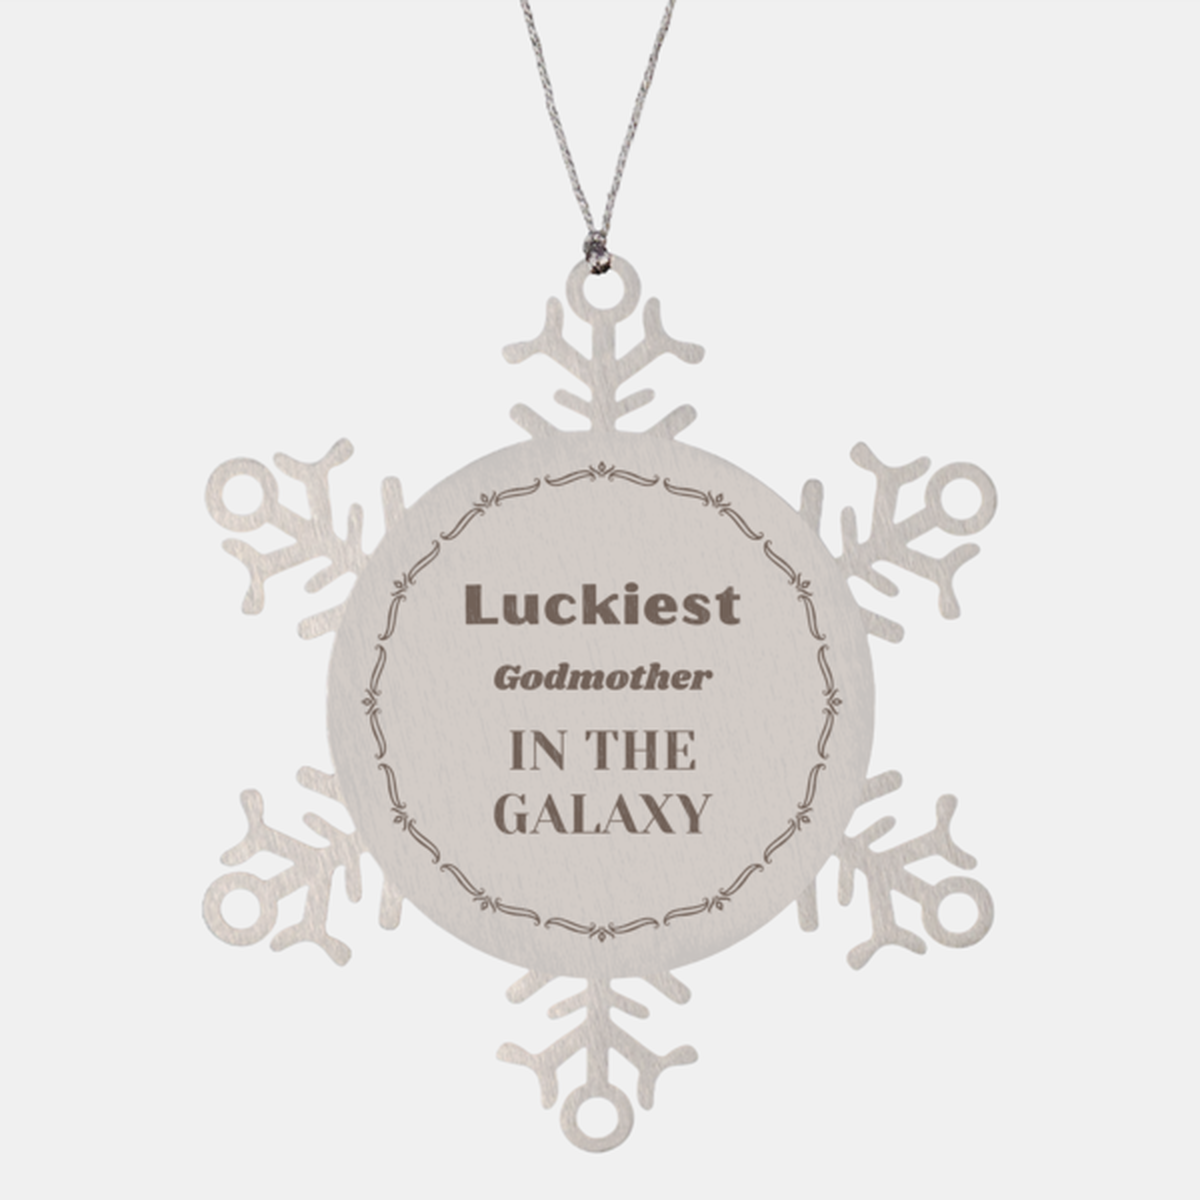 Luckiest Godmother in the Galaxy, To My Godmother Ornament Gifts, Christmas Godmother Snowflake Ornament Gifts, X-mas Decorations Unique Gifts For Godmother Men Women